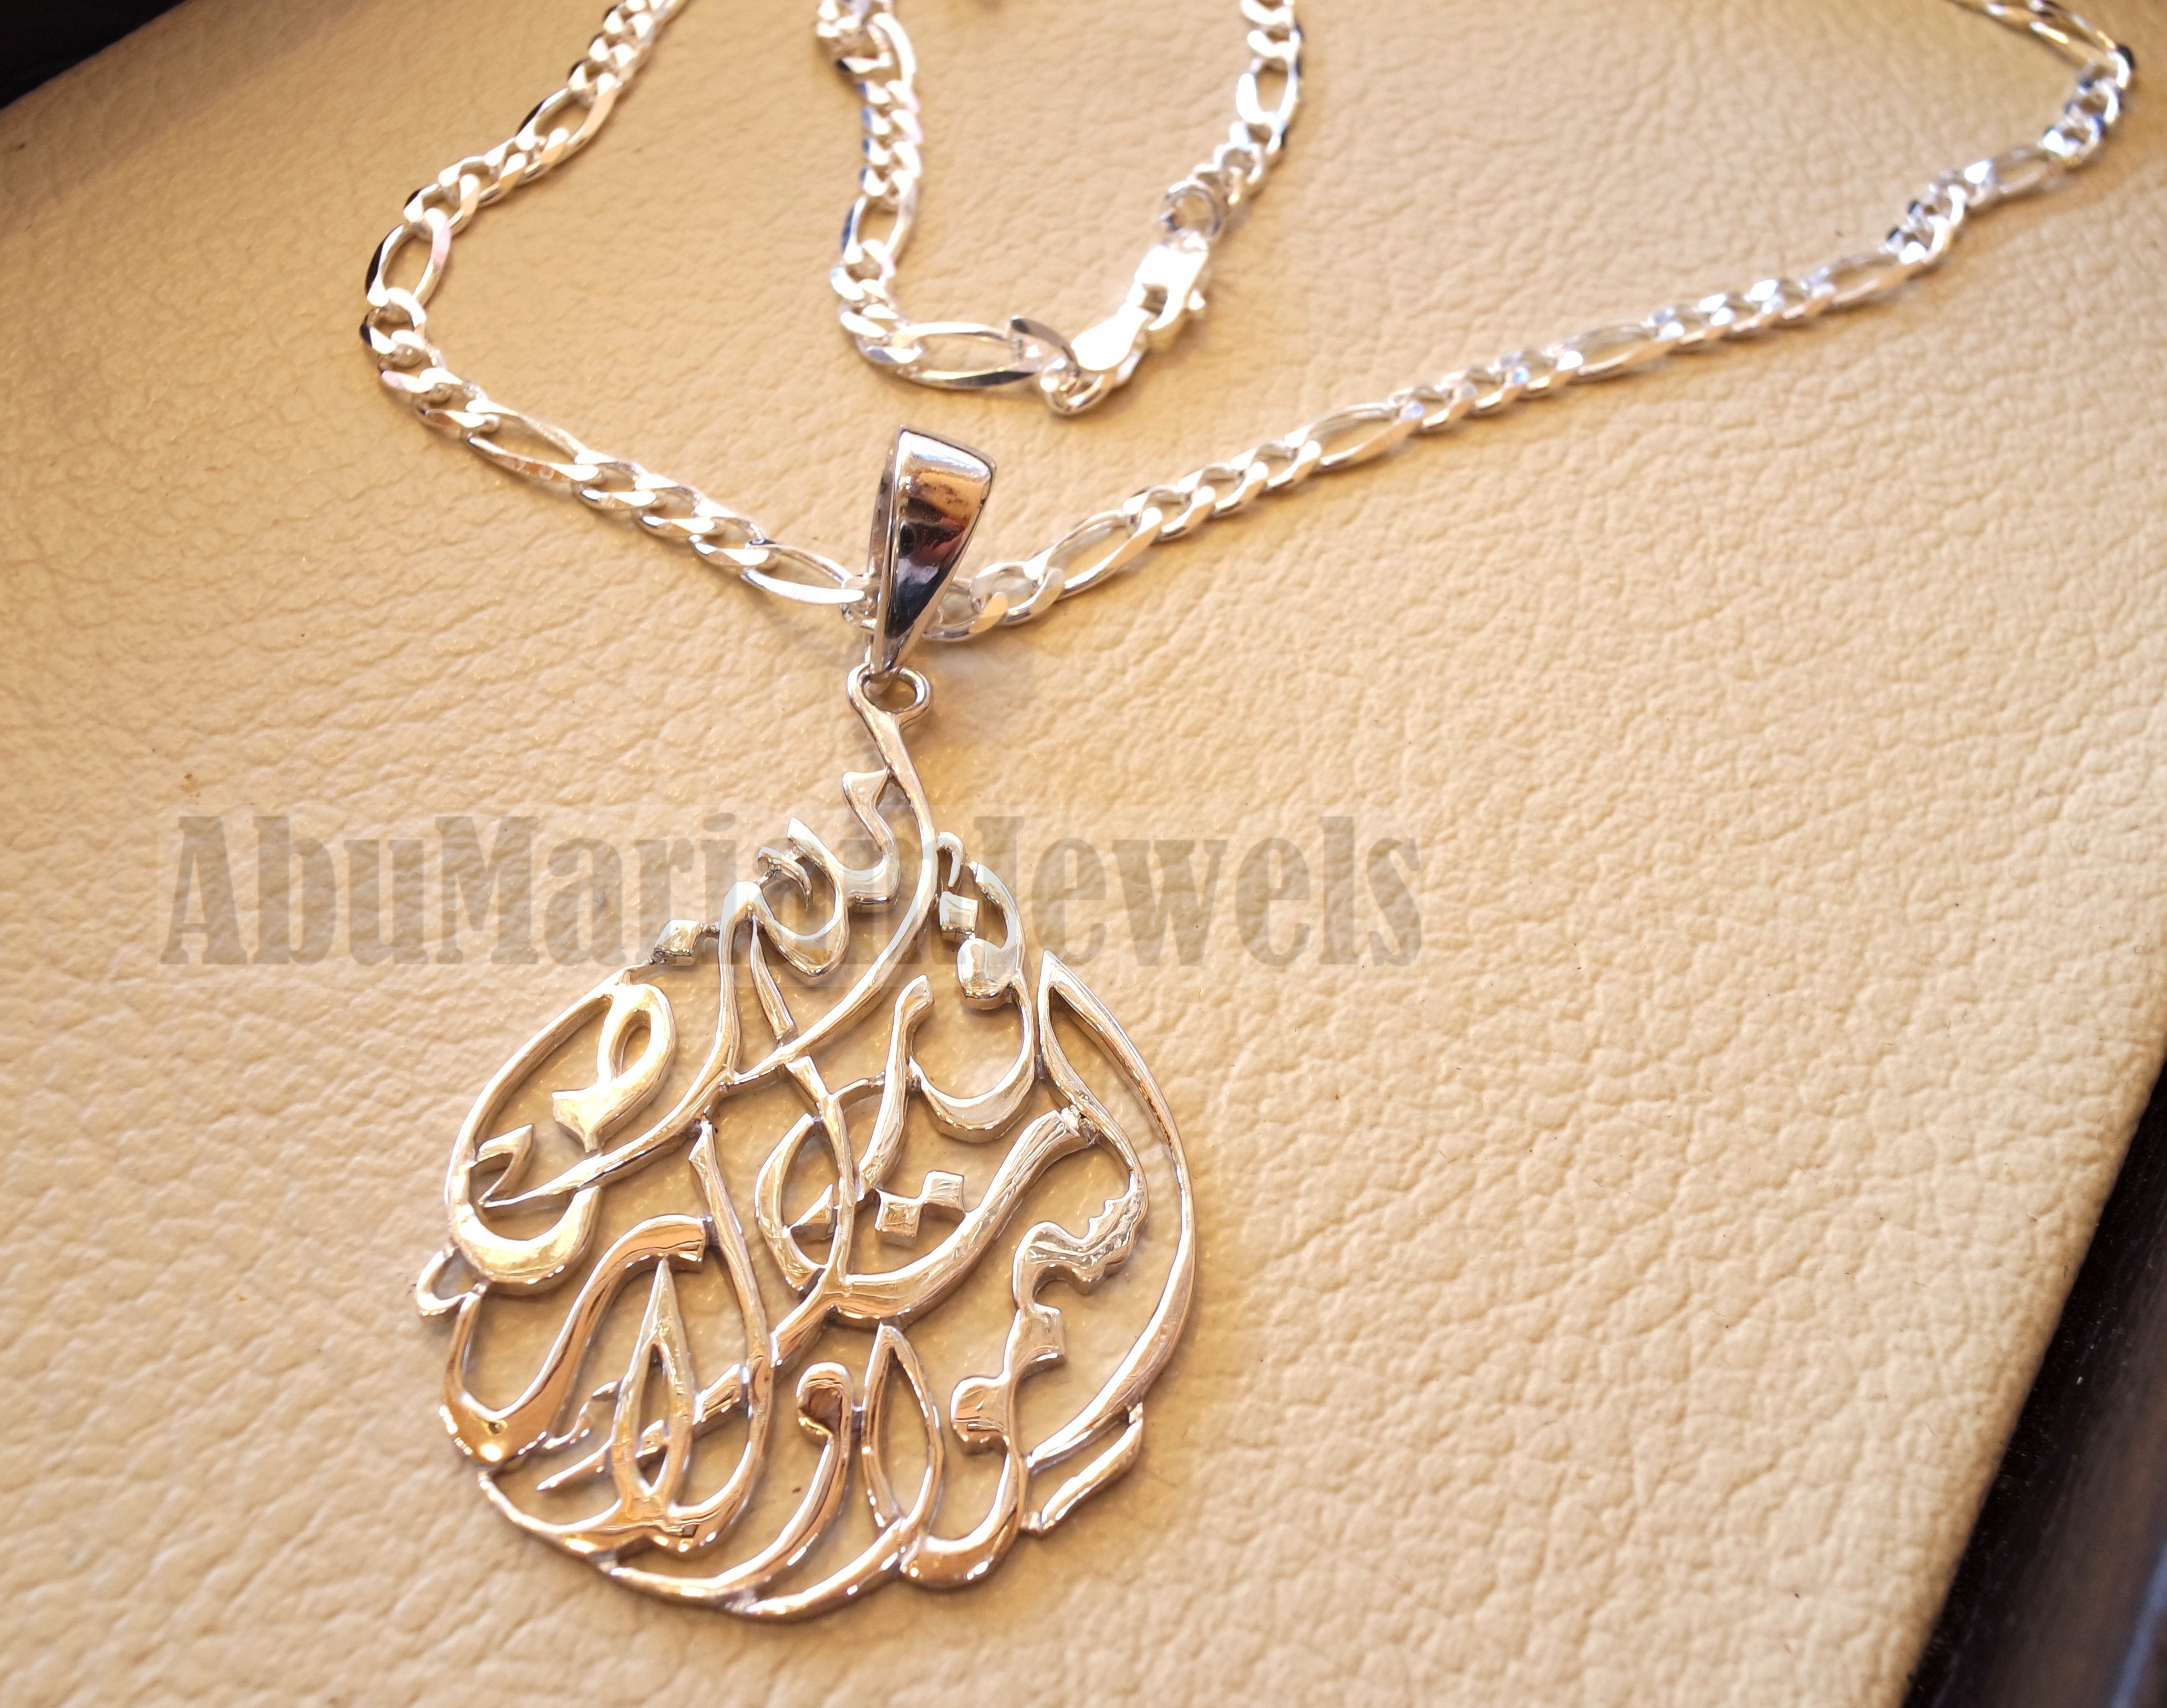 Allah noor Alsamawat quraan verses handmade calligraphy sterling silver 925 pear necklace thick chain islamic arabic اسلام الله